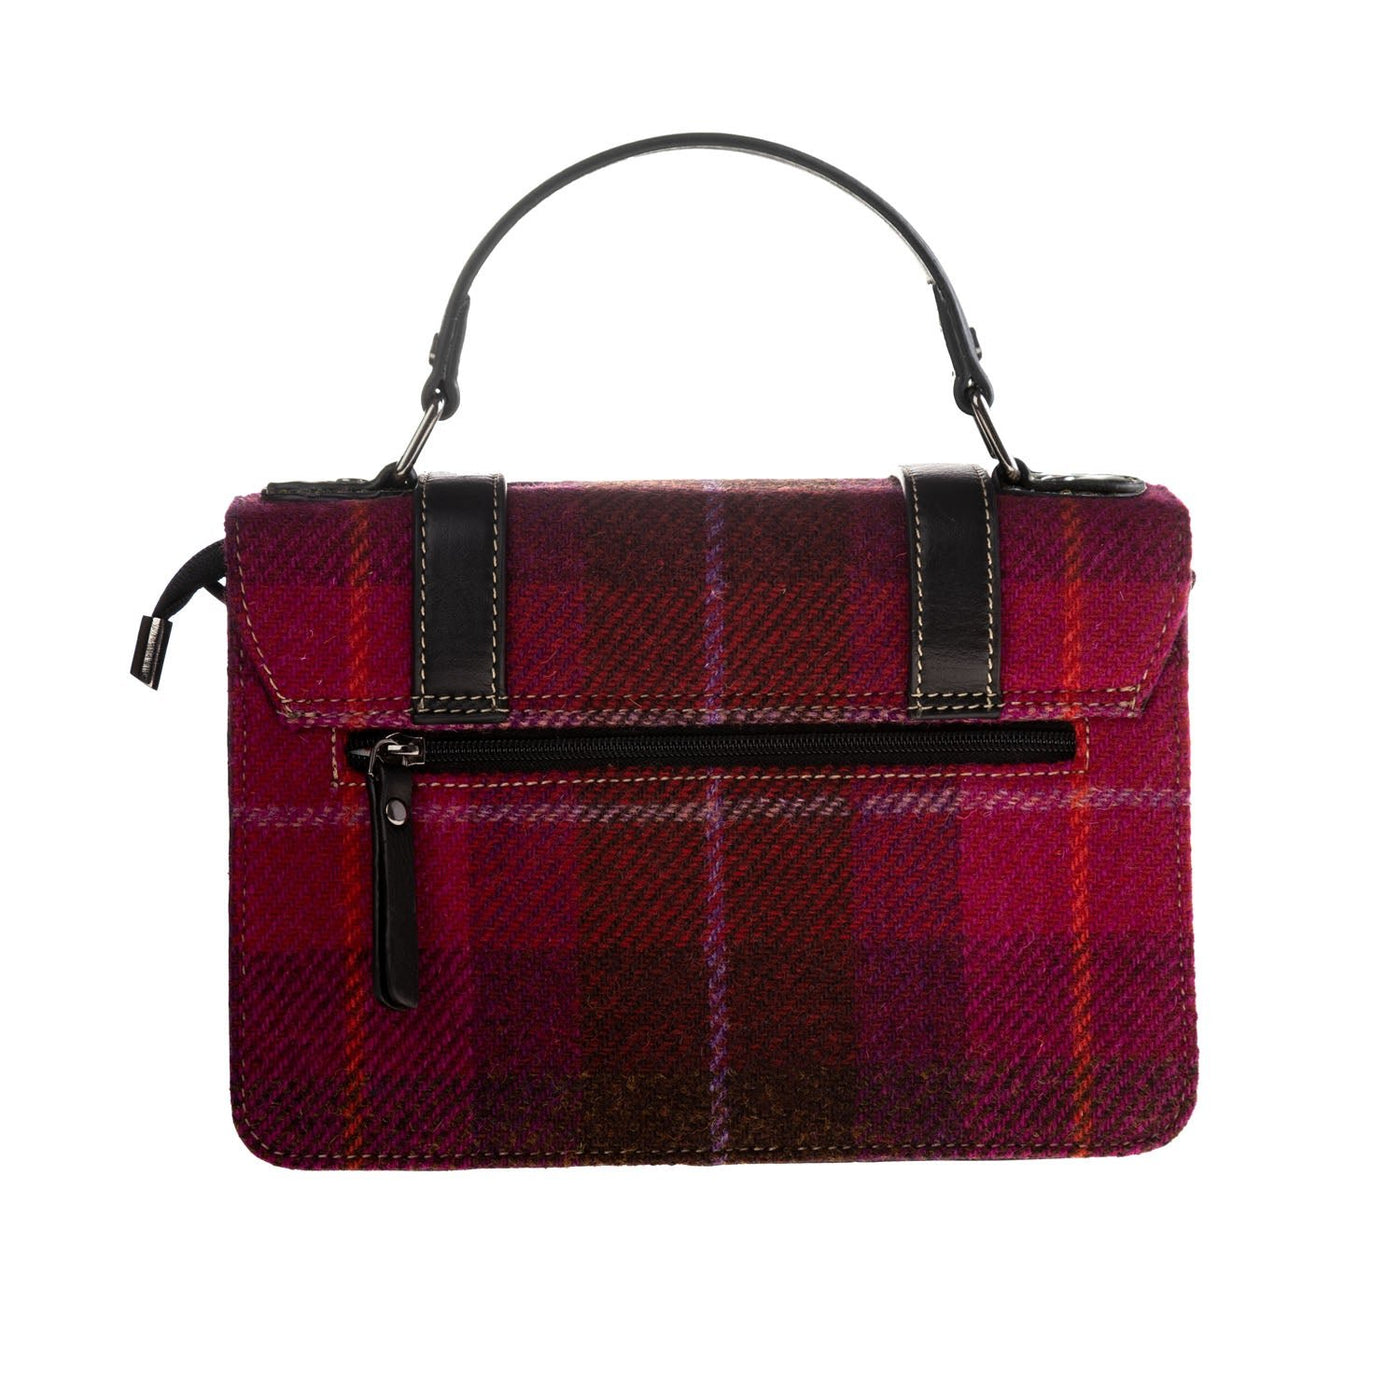 Ht Leather Satchel Bag Red Check / Red - Dunedin Cashmere